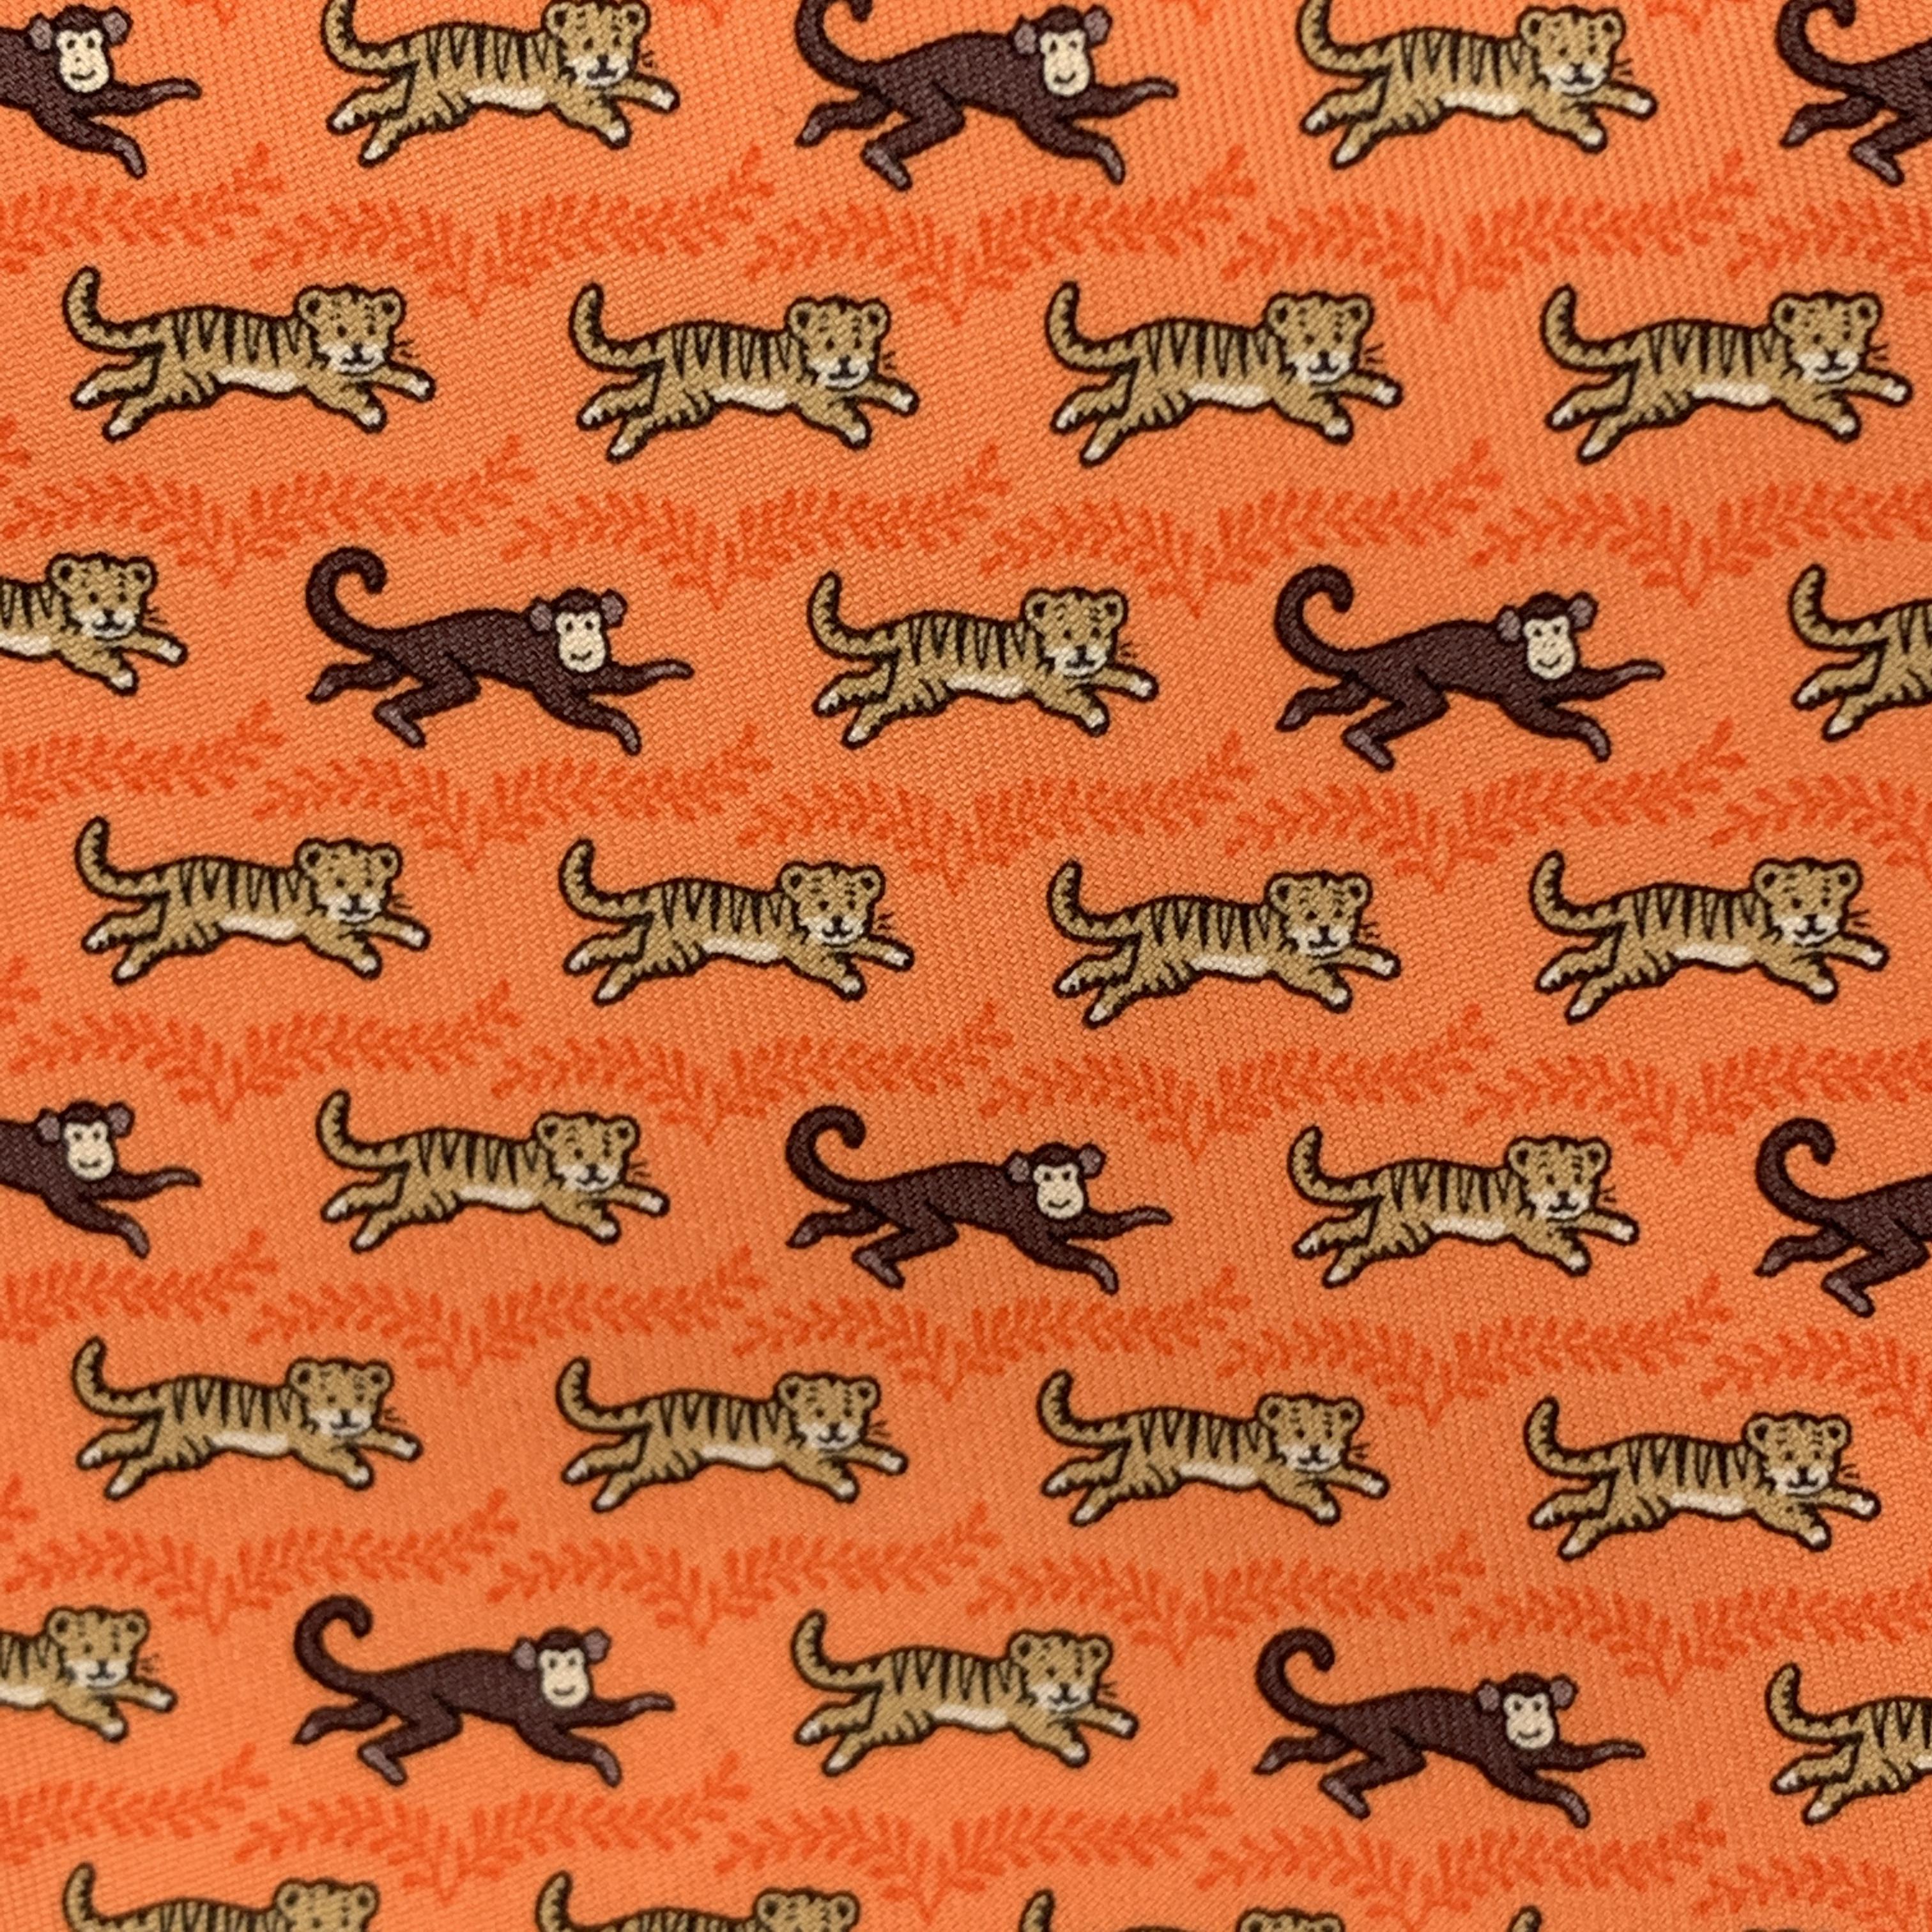 HERMES necktie comes in orange silk twill with all over tigers and monkeys print. Made in France.

New with tag.

Width: 3.75 in. 